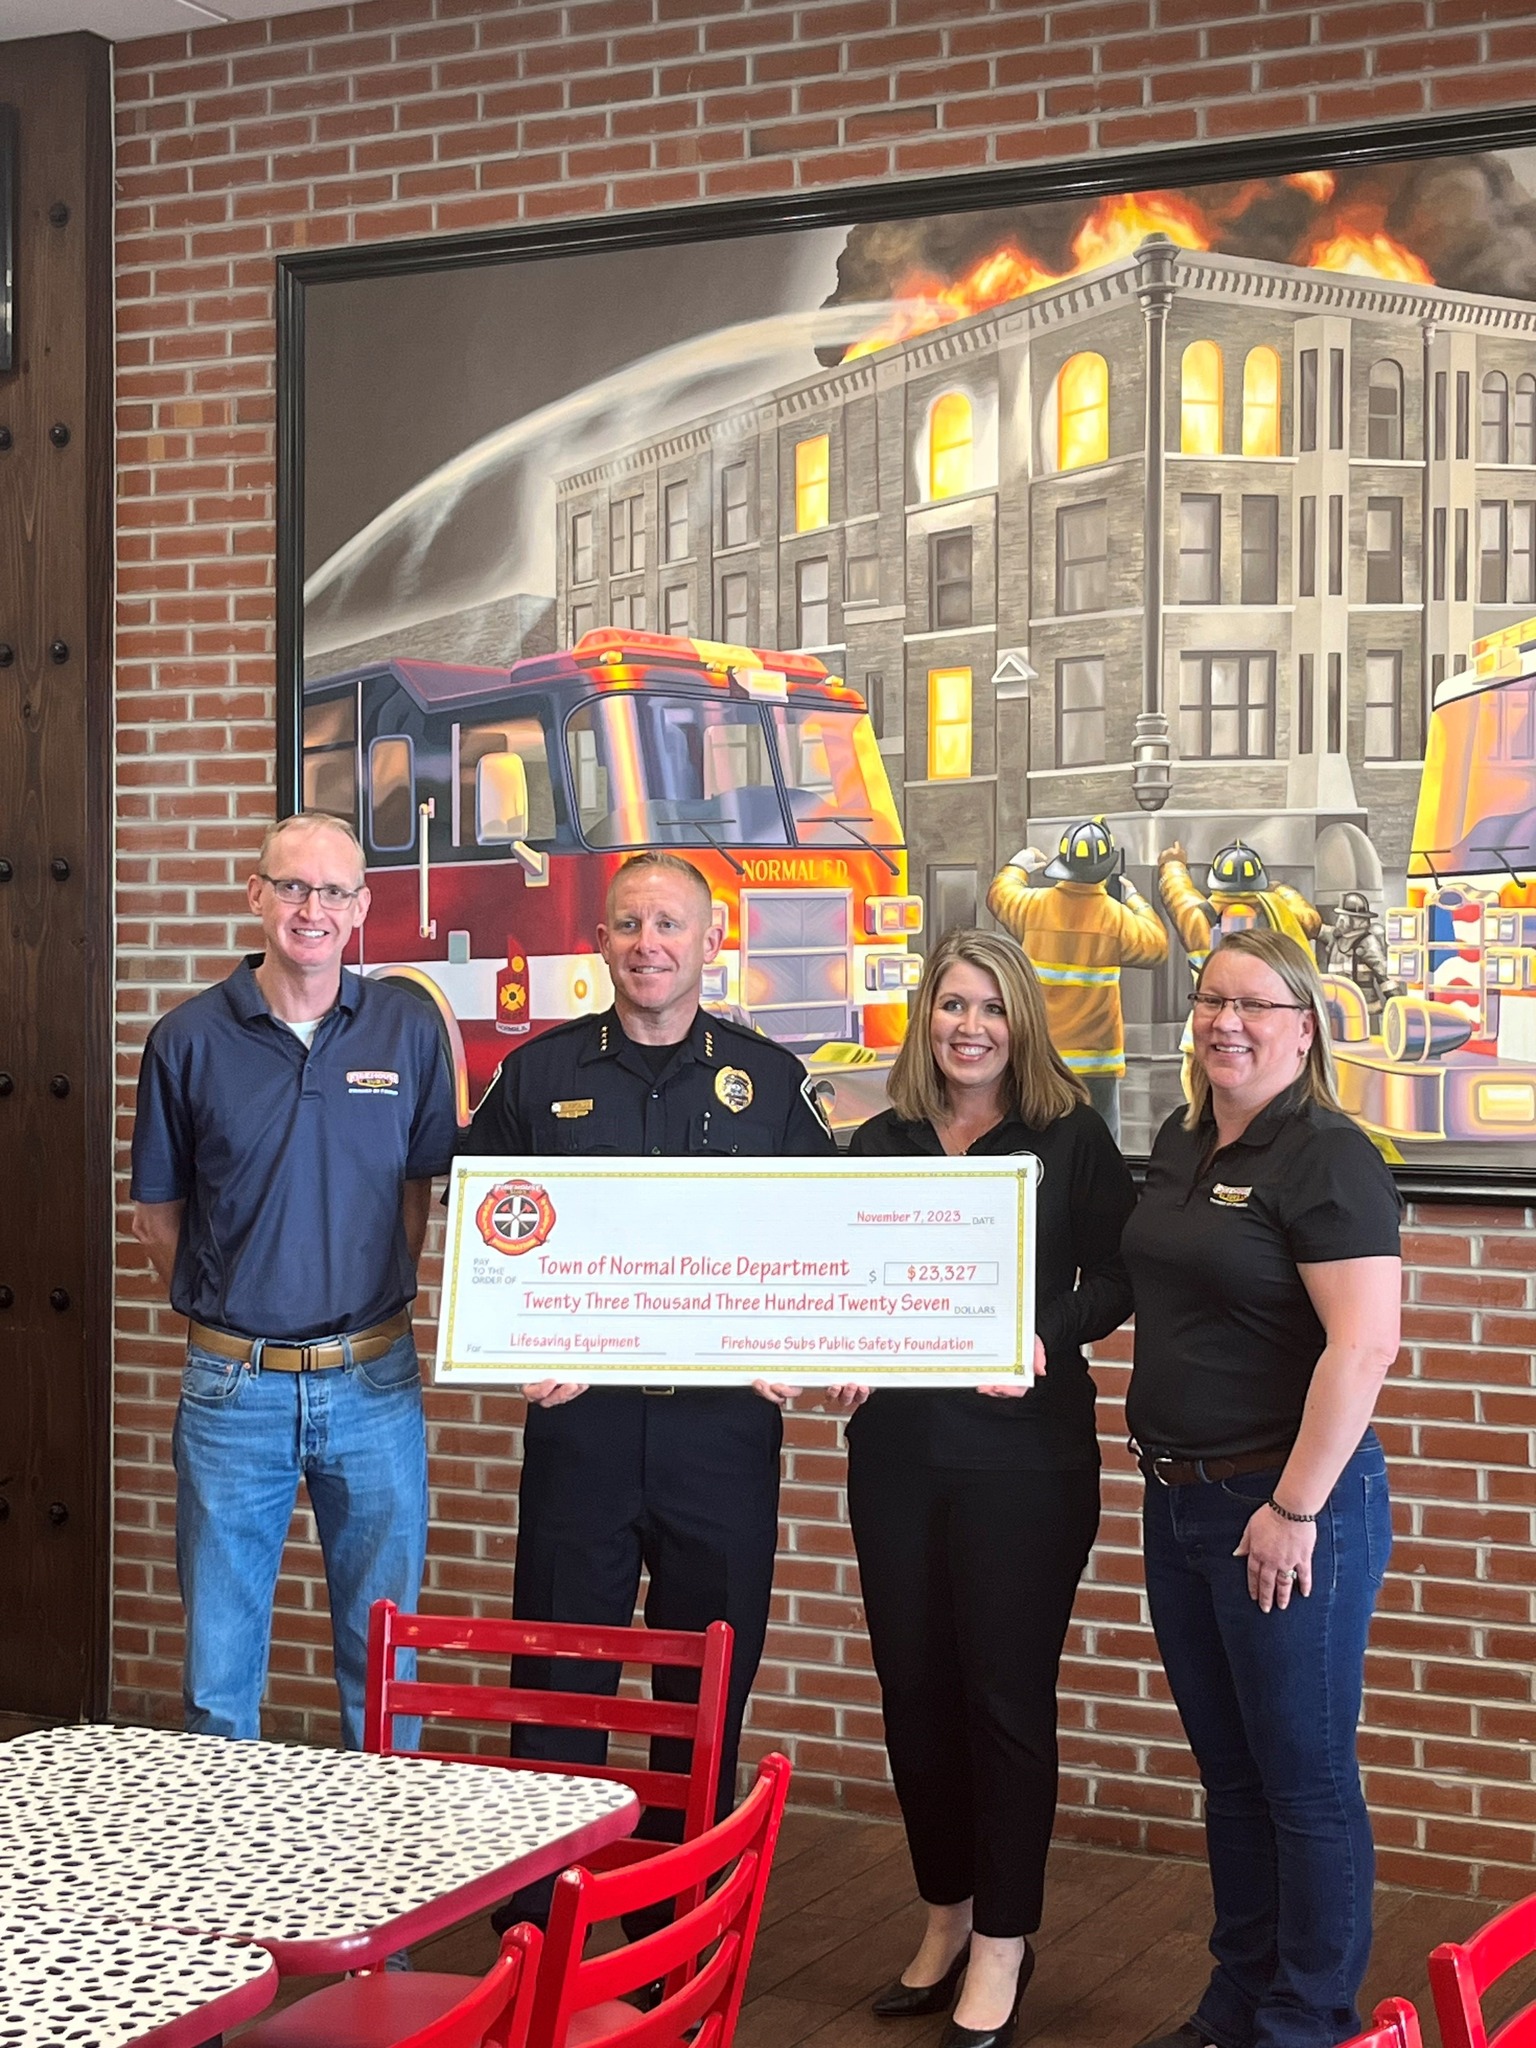 Firehouse Subs Public Safety Foundation awards Normal police department with new AED’s